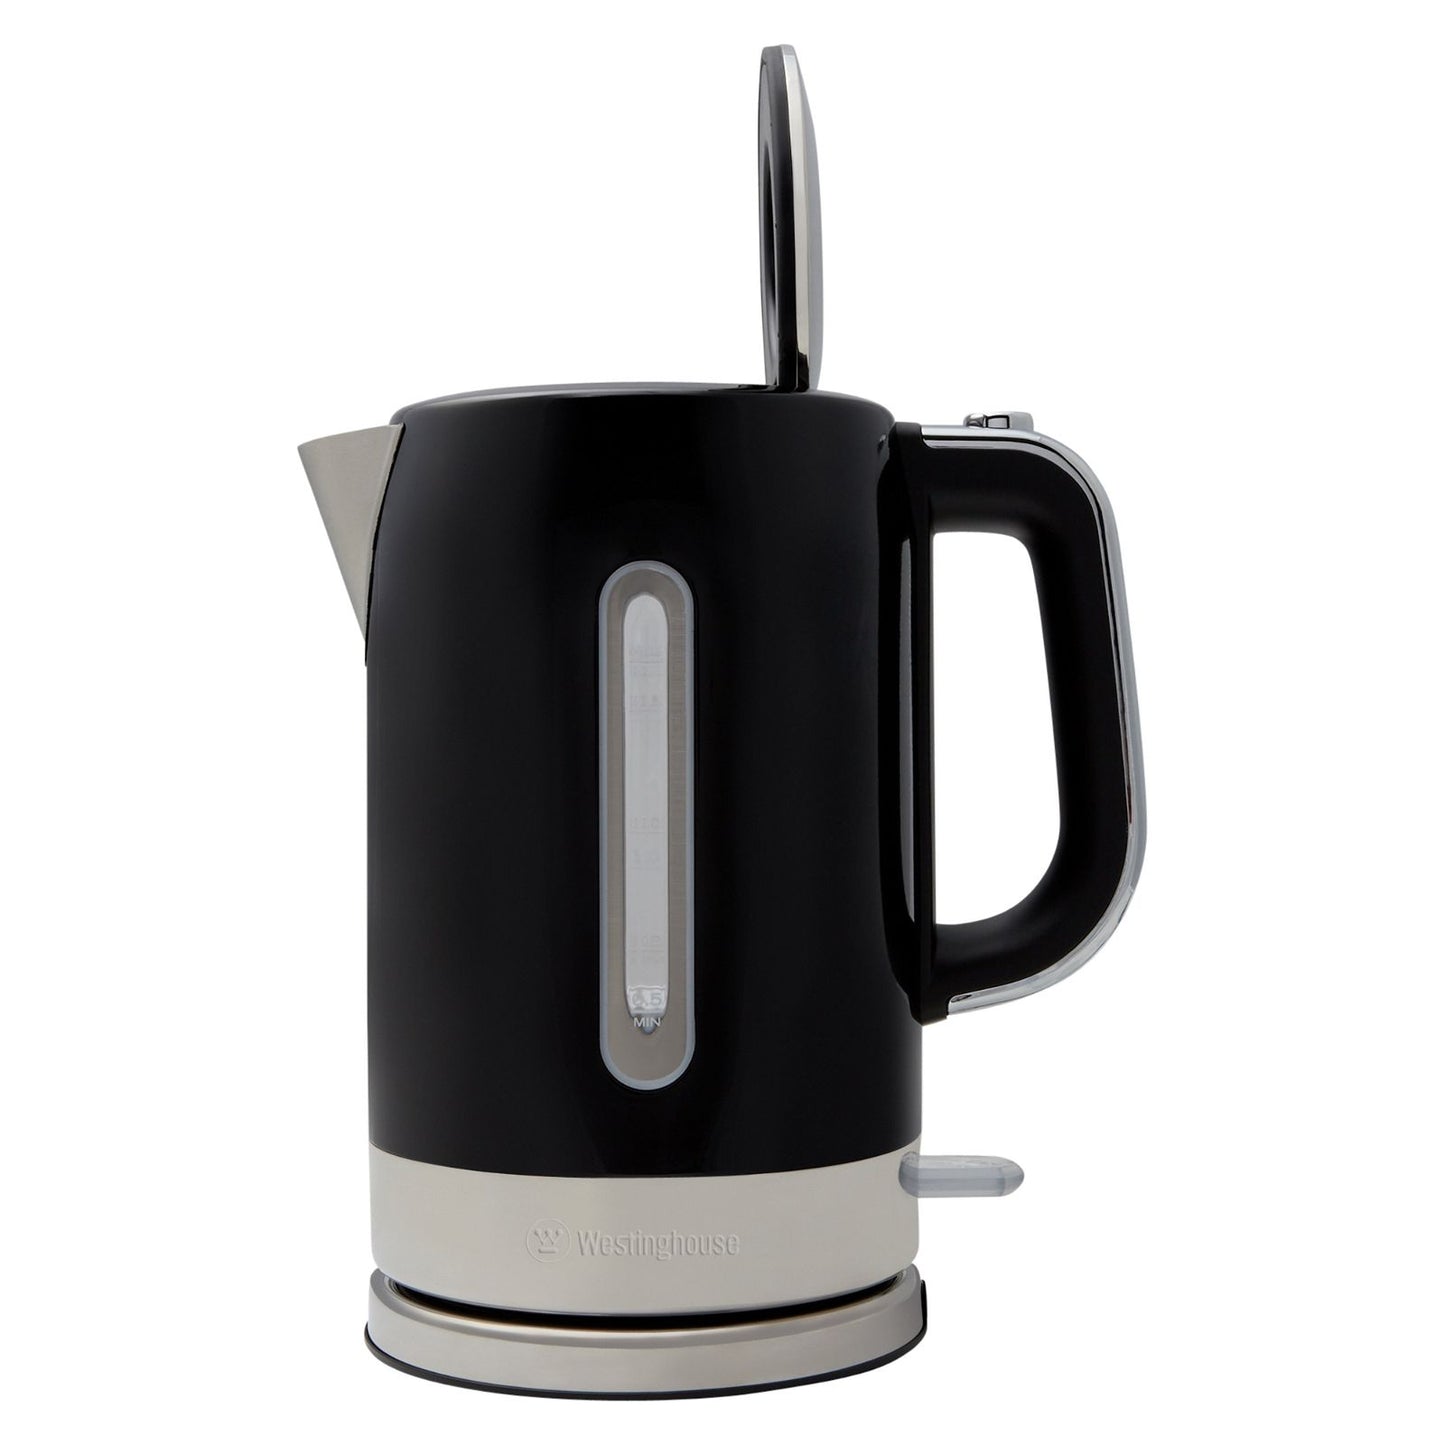 Westinghouse Kettle 1.7L Black Stainless Steel-#product_category#- Distributed by:  under license